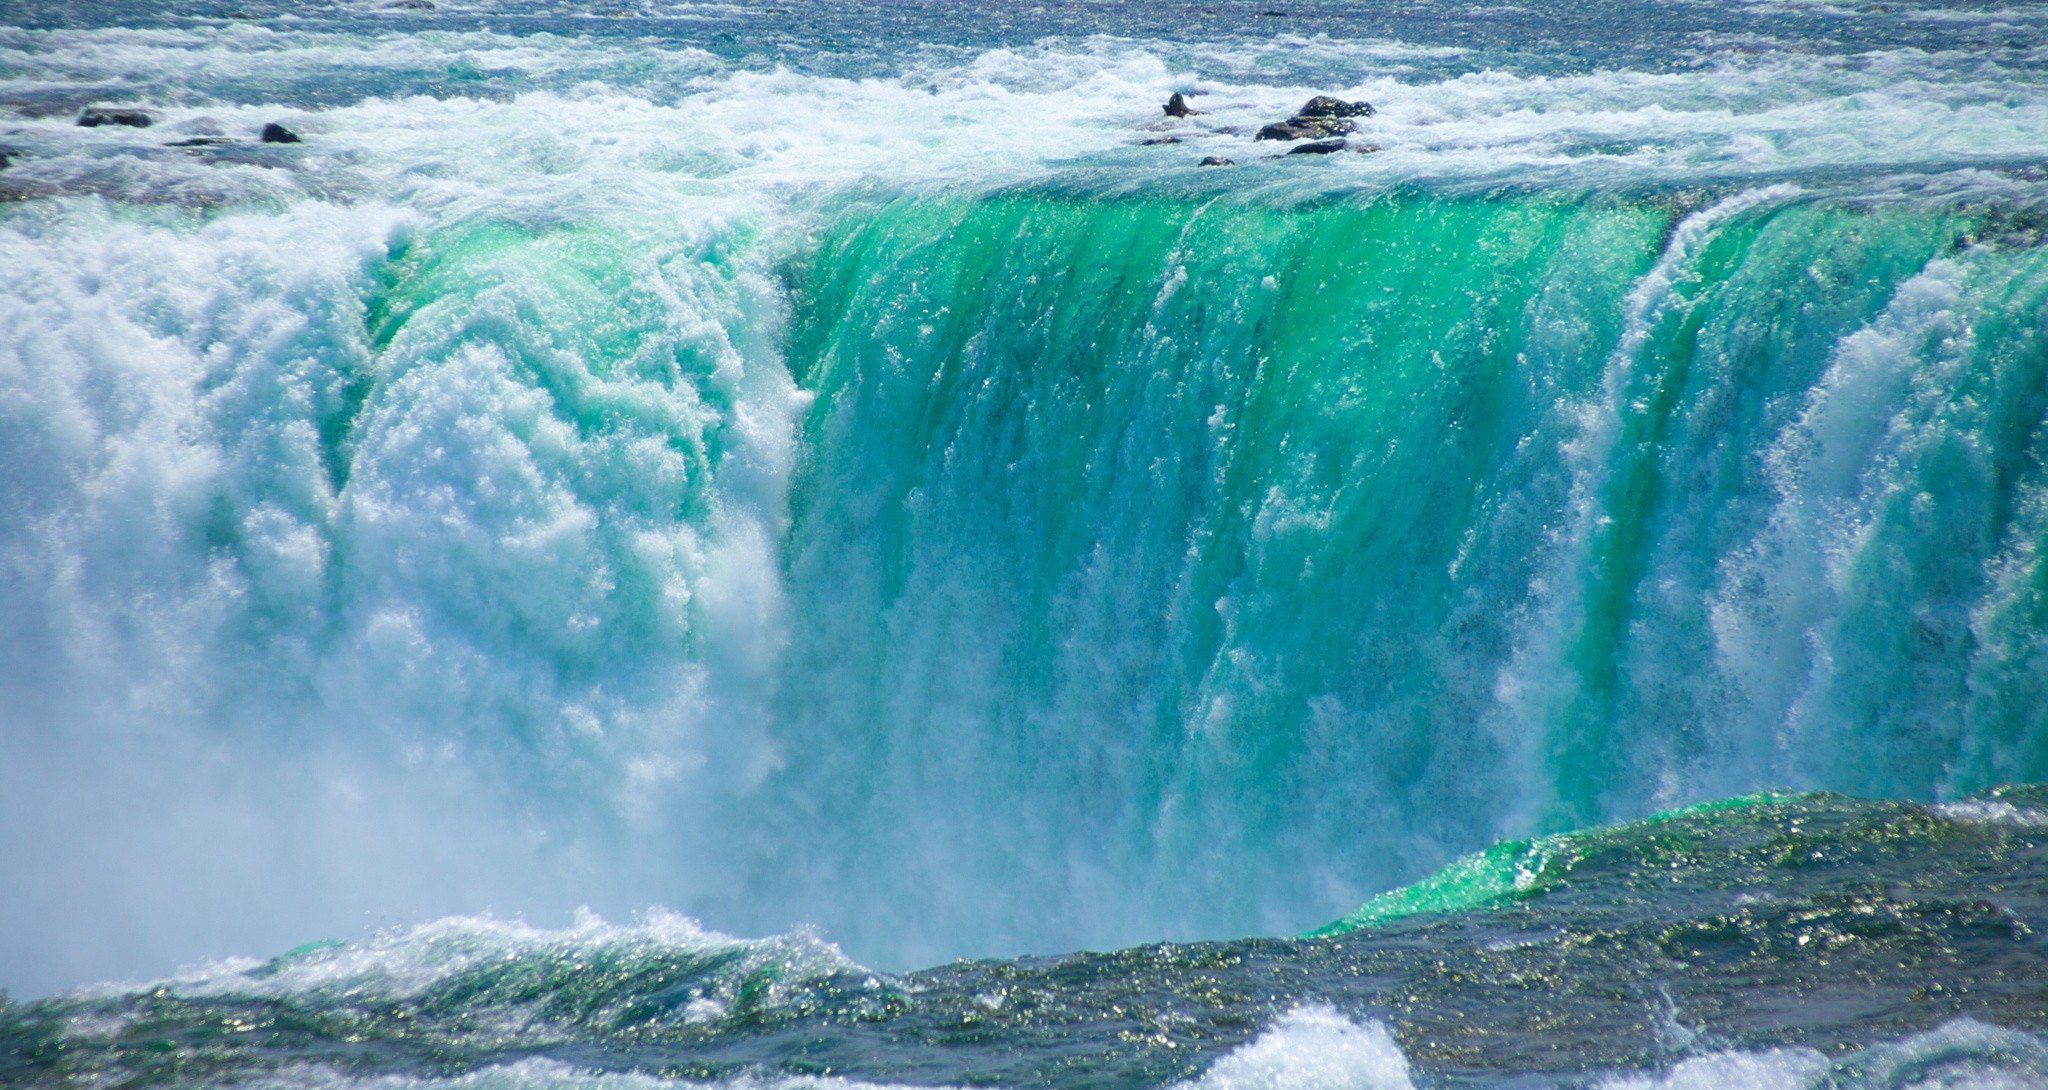 General 2048x1090 water rapids waterfall Canada green white nature river landscape turquoise